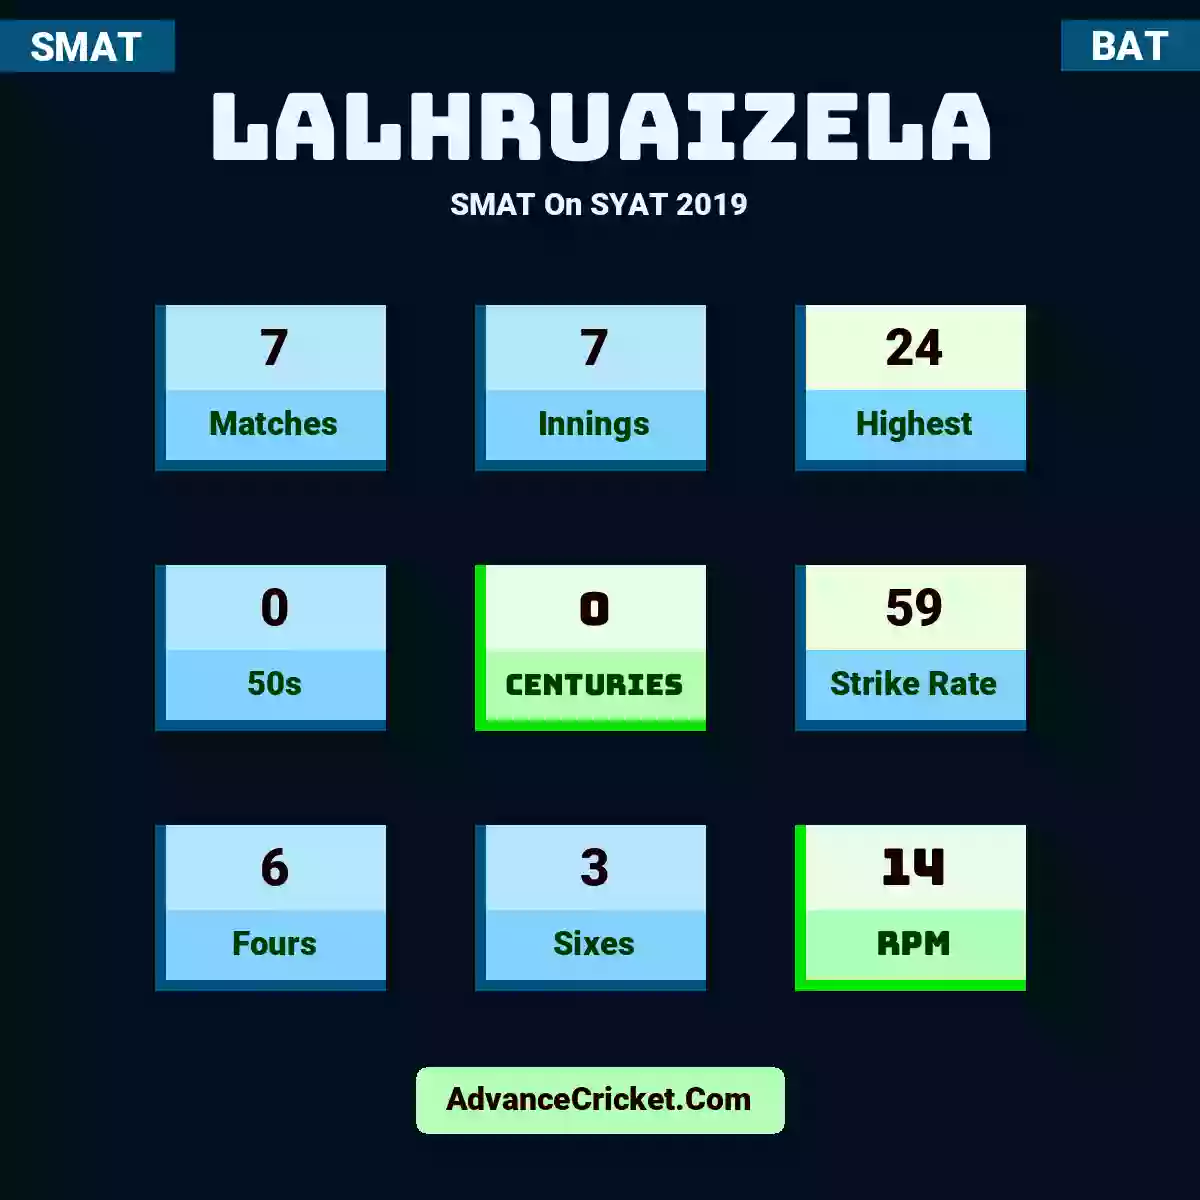 Lalhruaizela SMAT  On SYAT 2019, Lalhruaizela played 7 matches, scored 24 runs as highest, 0 half-centuries, and 0 centuries, with a strike rate of 59. L.Lalhruaizela hit 6 fours and 3 sixes, with an RPM of 14.